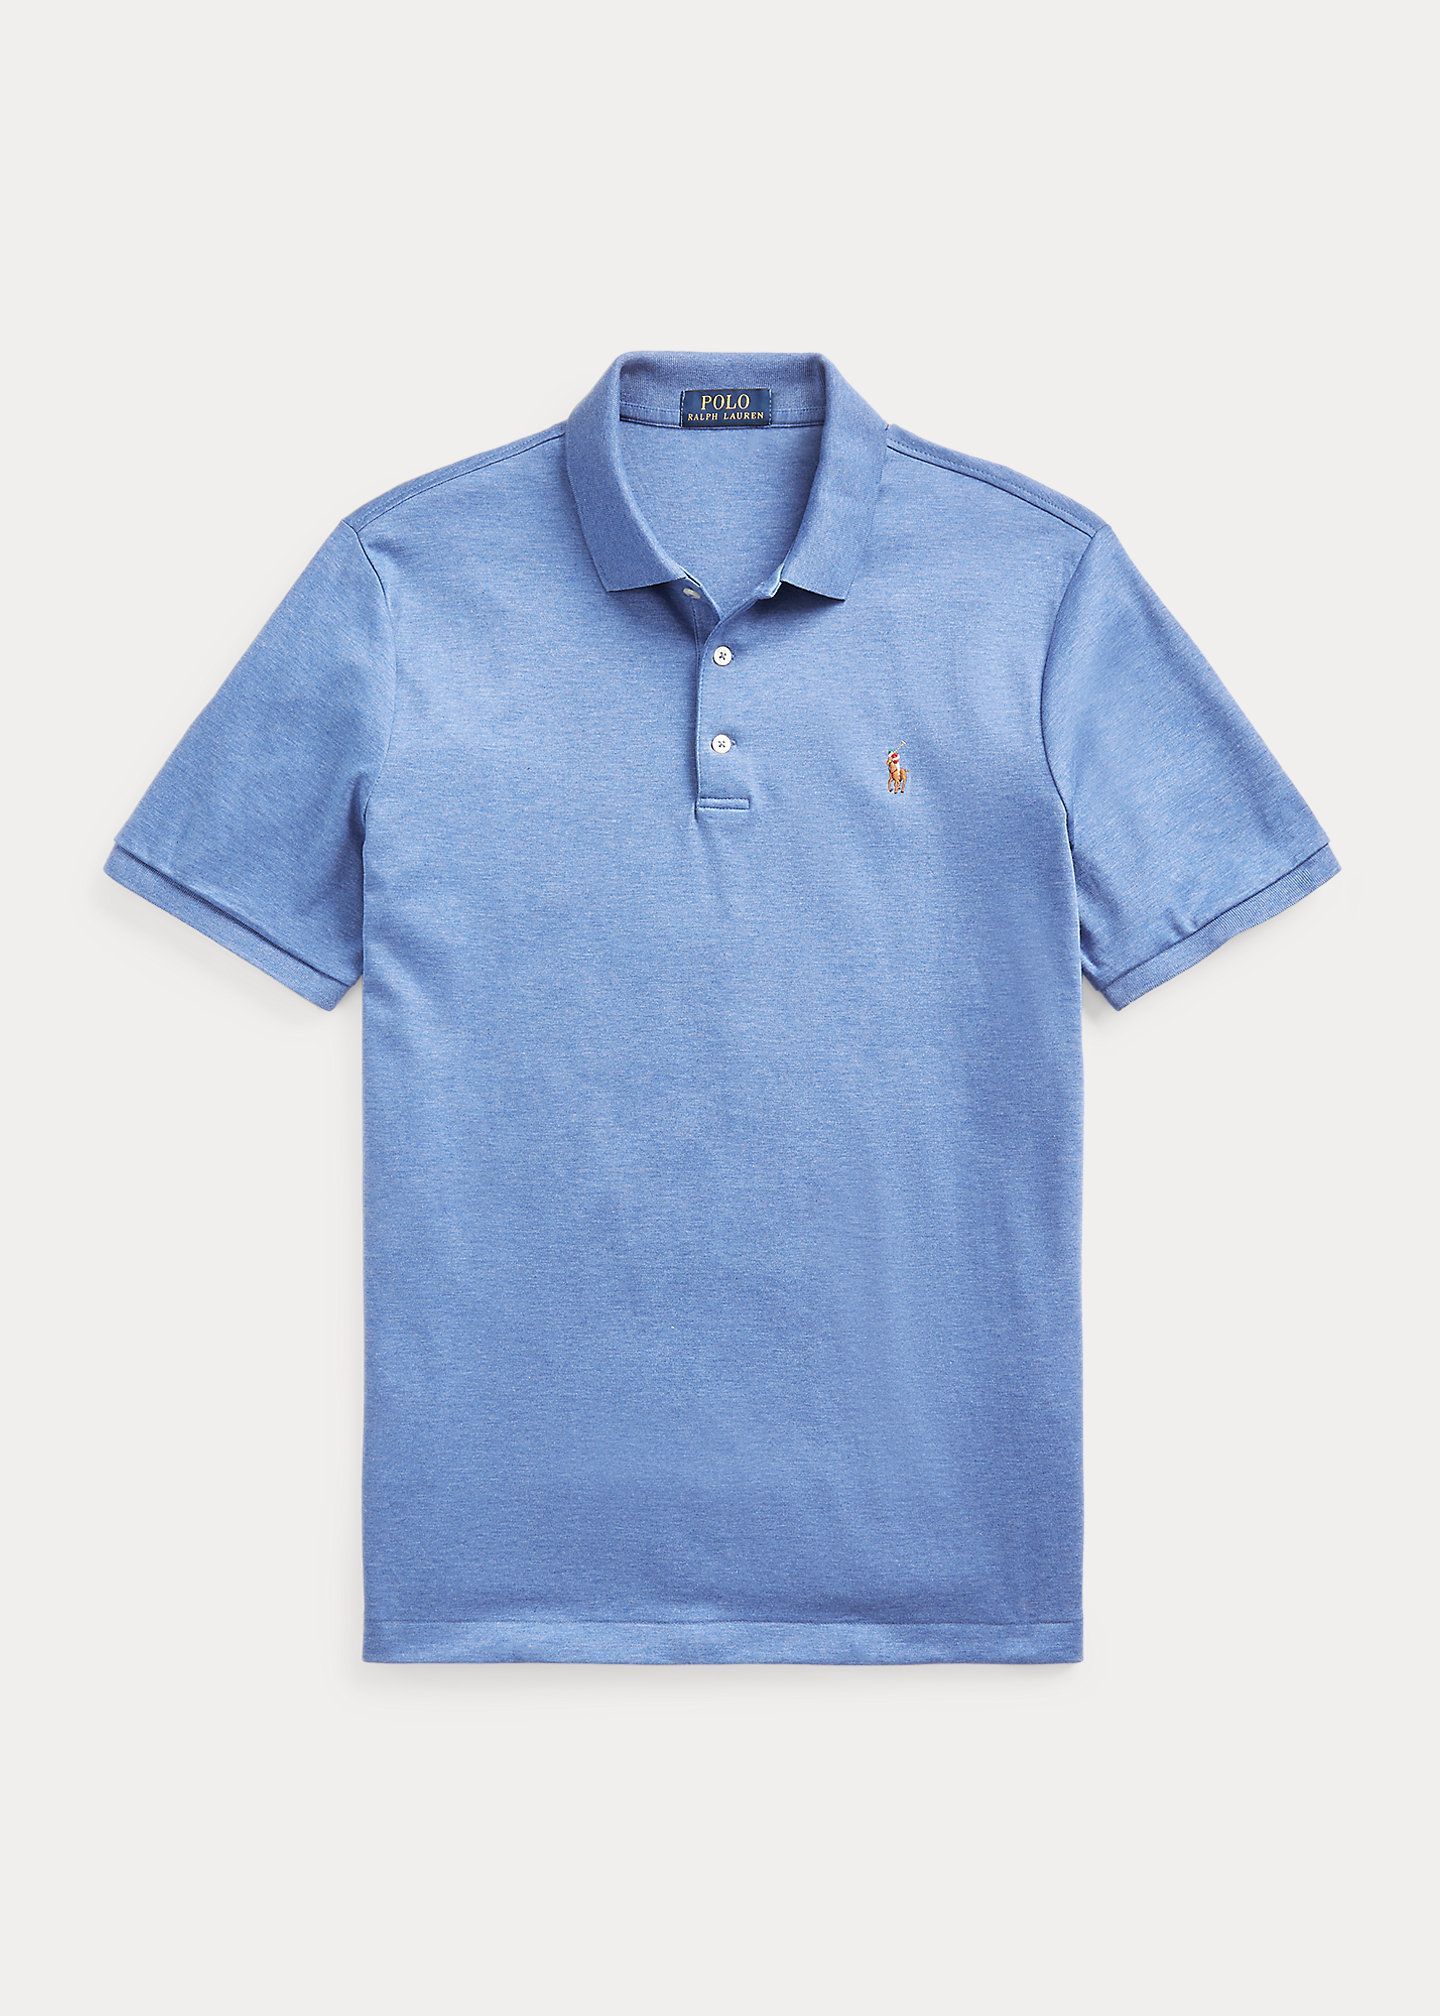 The 25 Best Men's Polo Shirts for 2023 - Top Polo Shirts